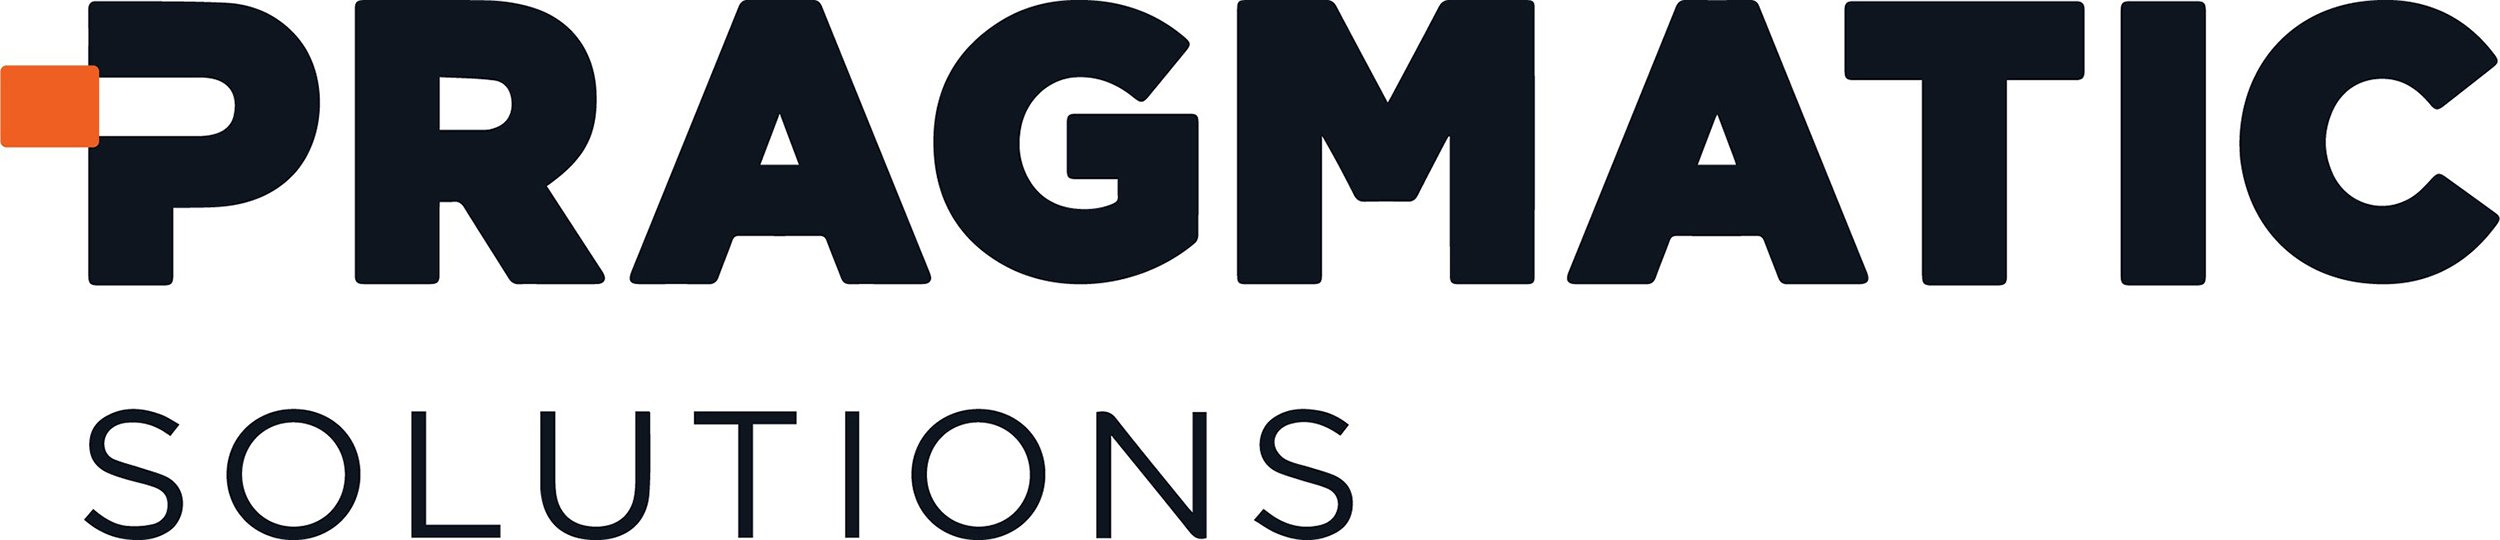 Flows -Pragmatic - iGaming's integration and automation platform